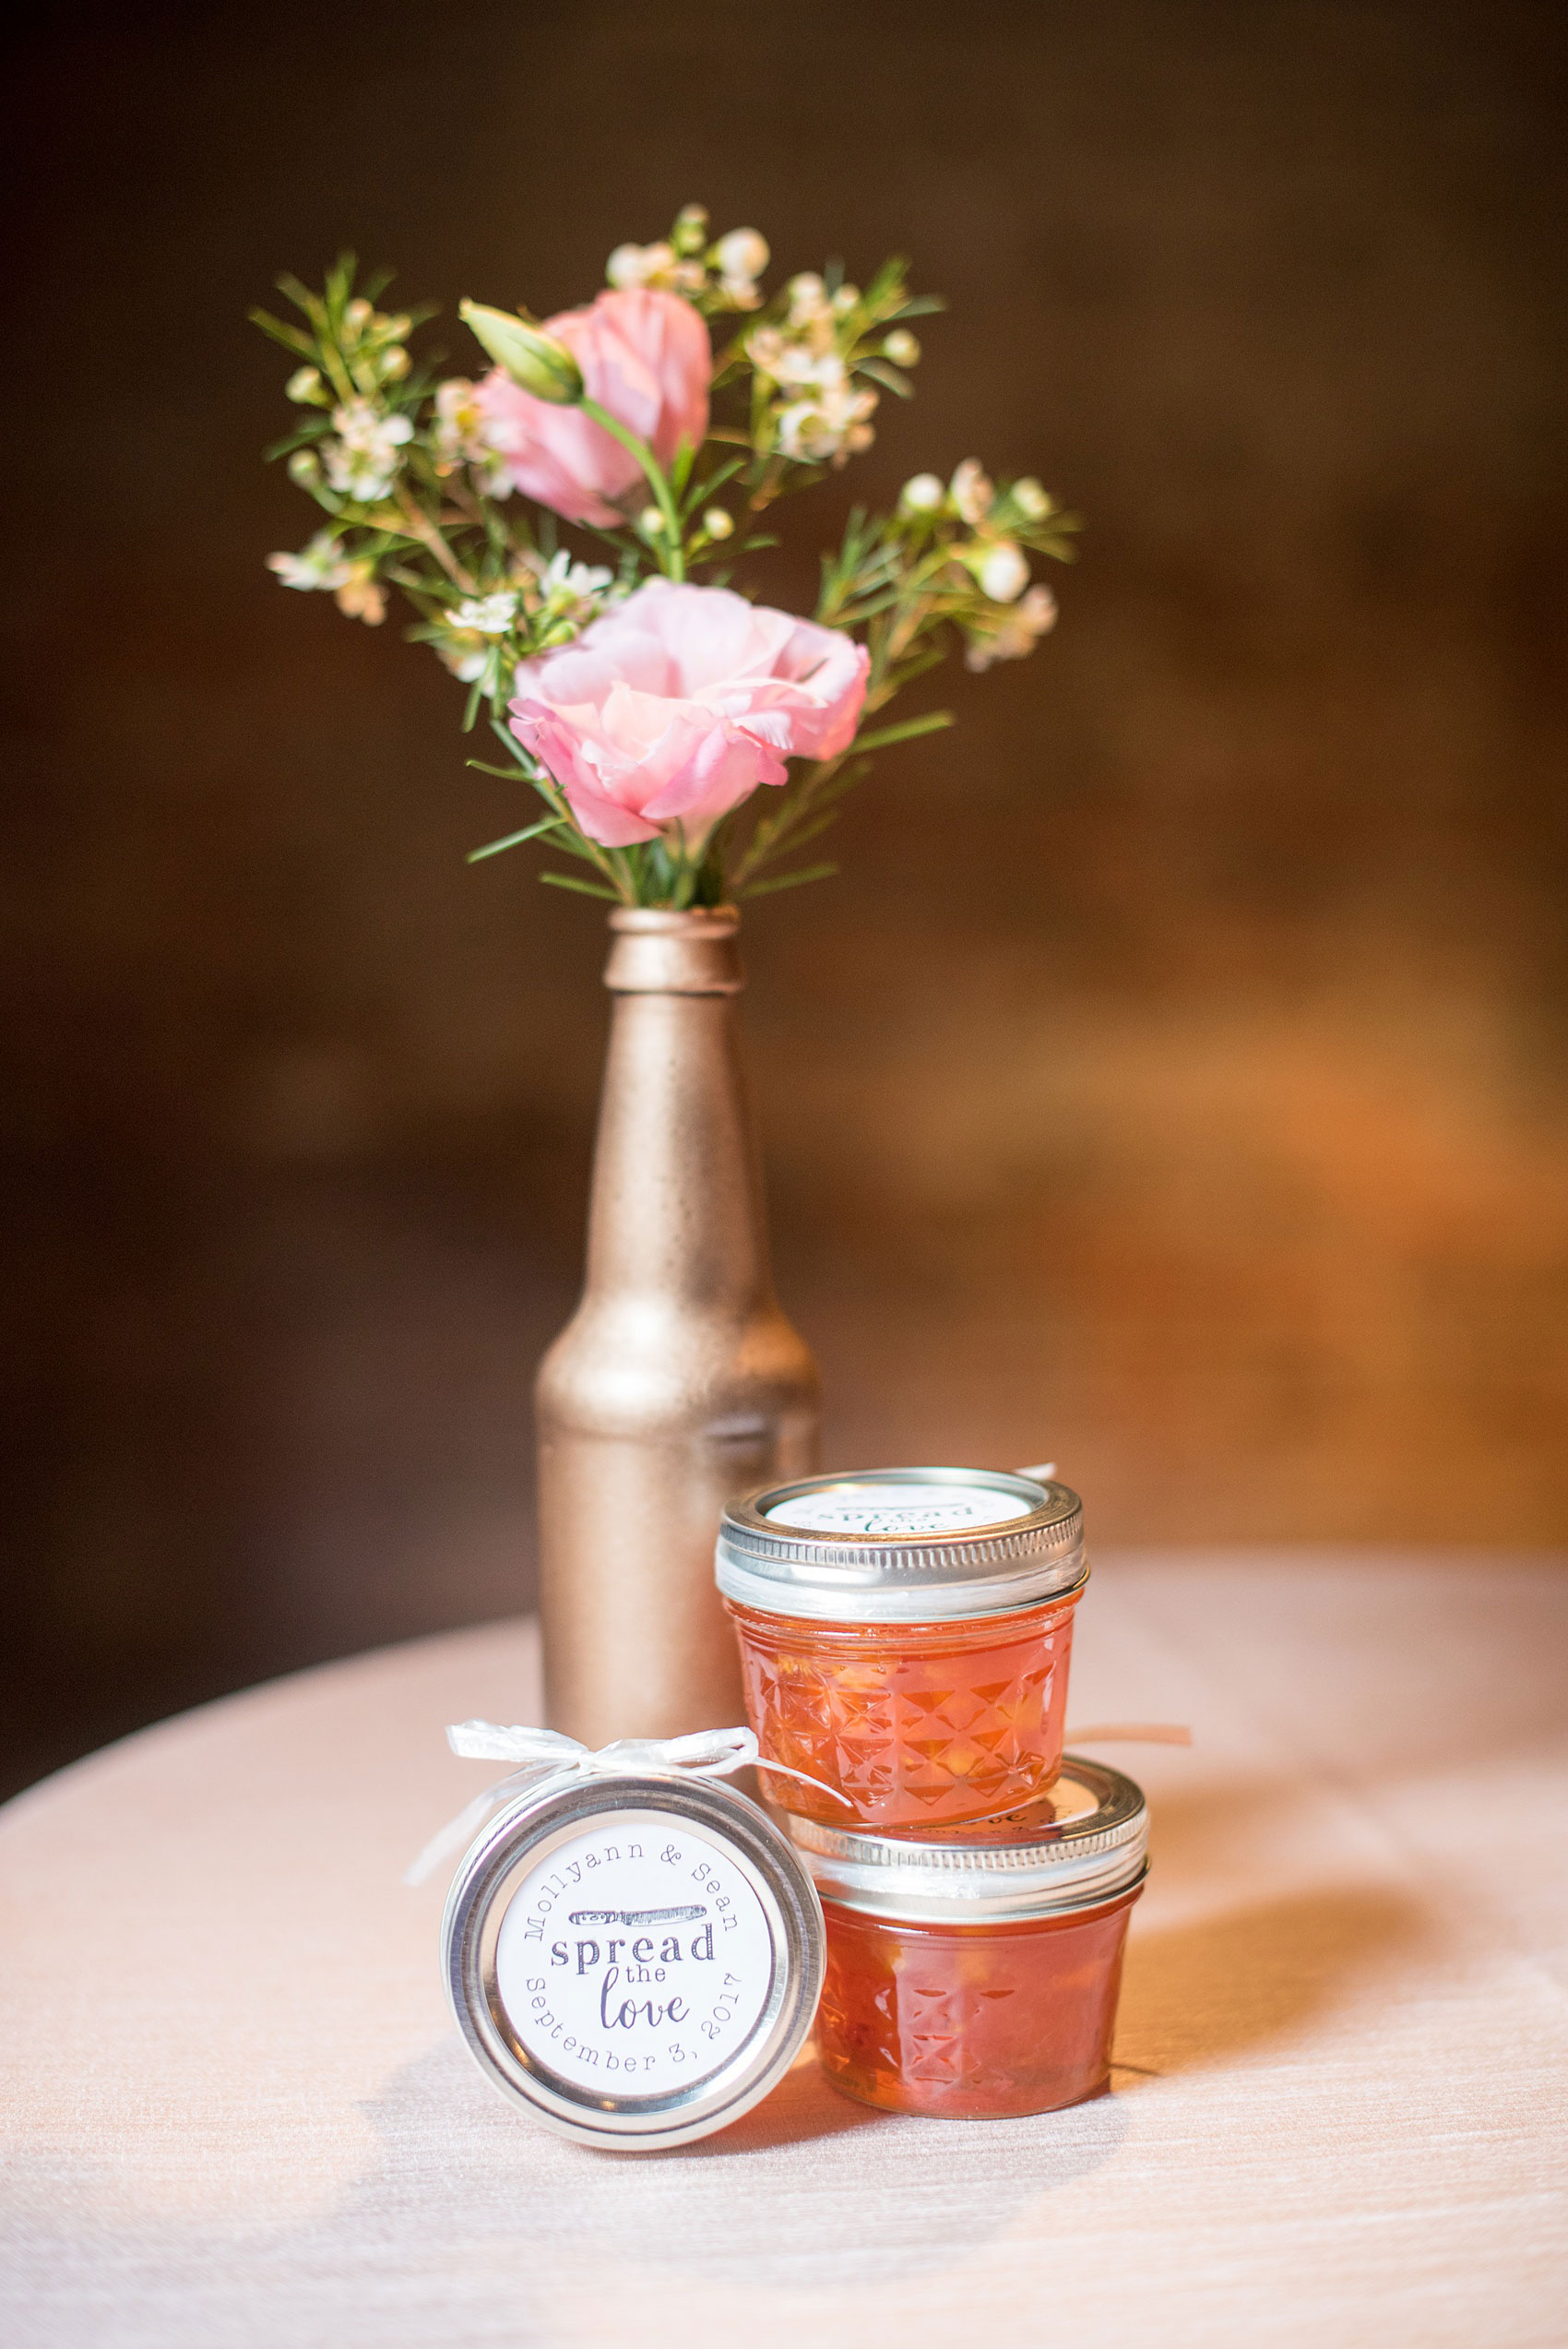 Mikkel Paige Photography photos from a downtown Raleigh wedding rehearsal dinner at Sitti restaurant. Photo of the custom jam jars they gave out as guest favors.